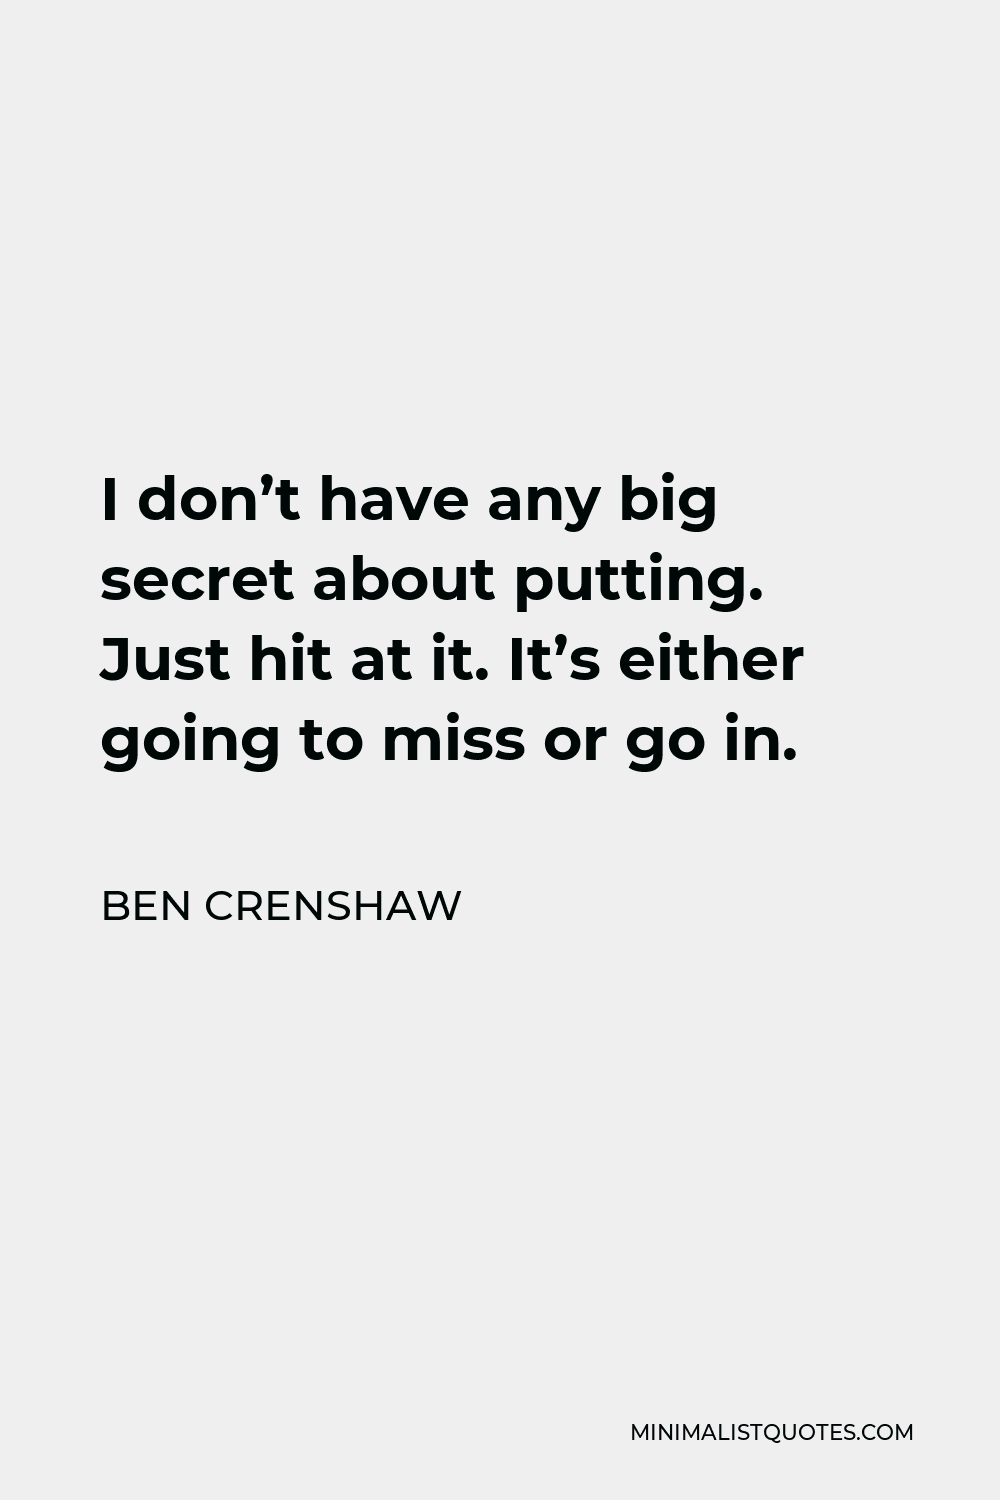 Ben Crenshaw Quote - I don’t have any big secret about putting. Just hit at it. It’s either going to miss or go in.